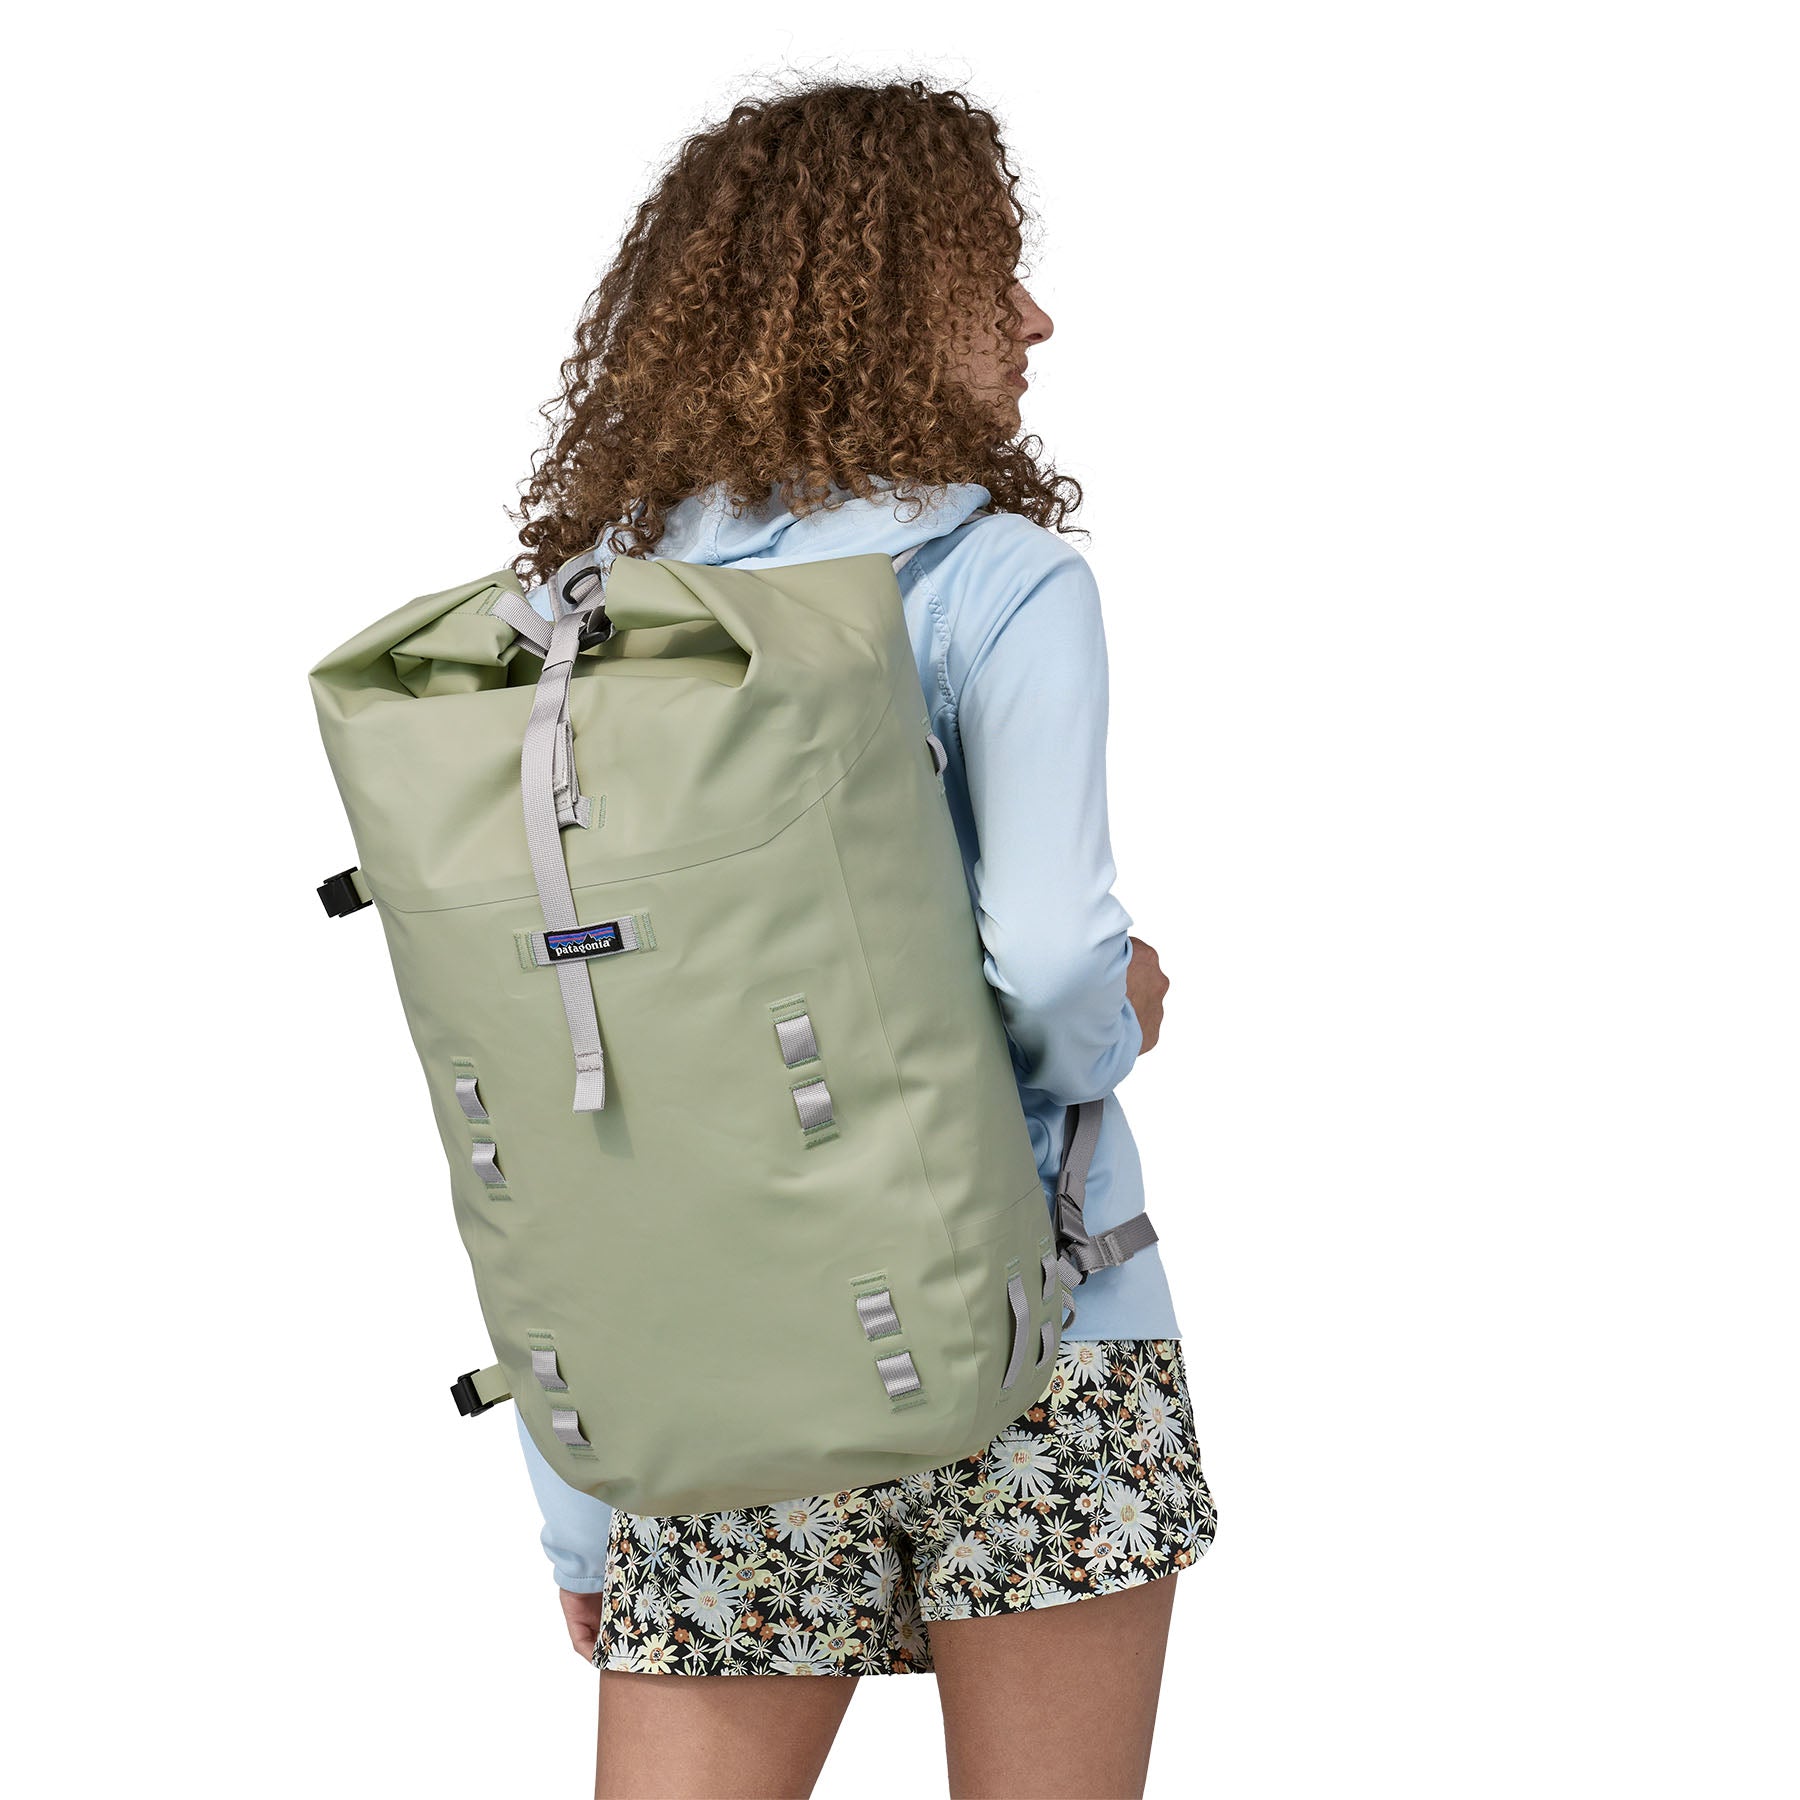 Patagonia Guidewater Backpack - Fin & Fire Fly Shop